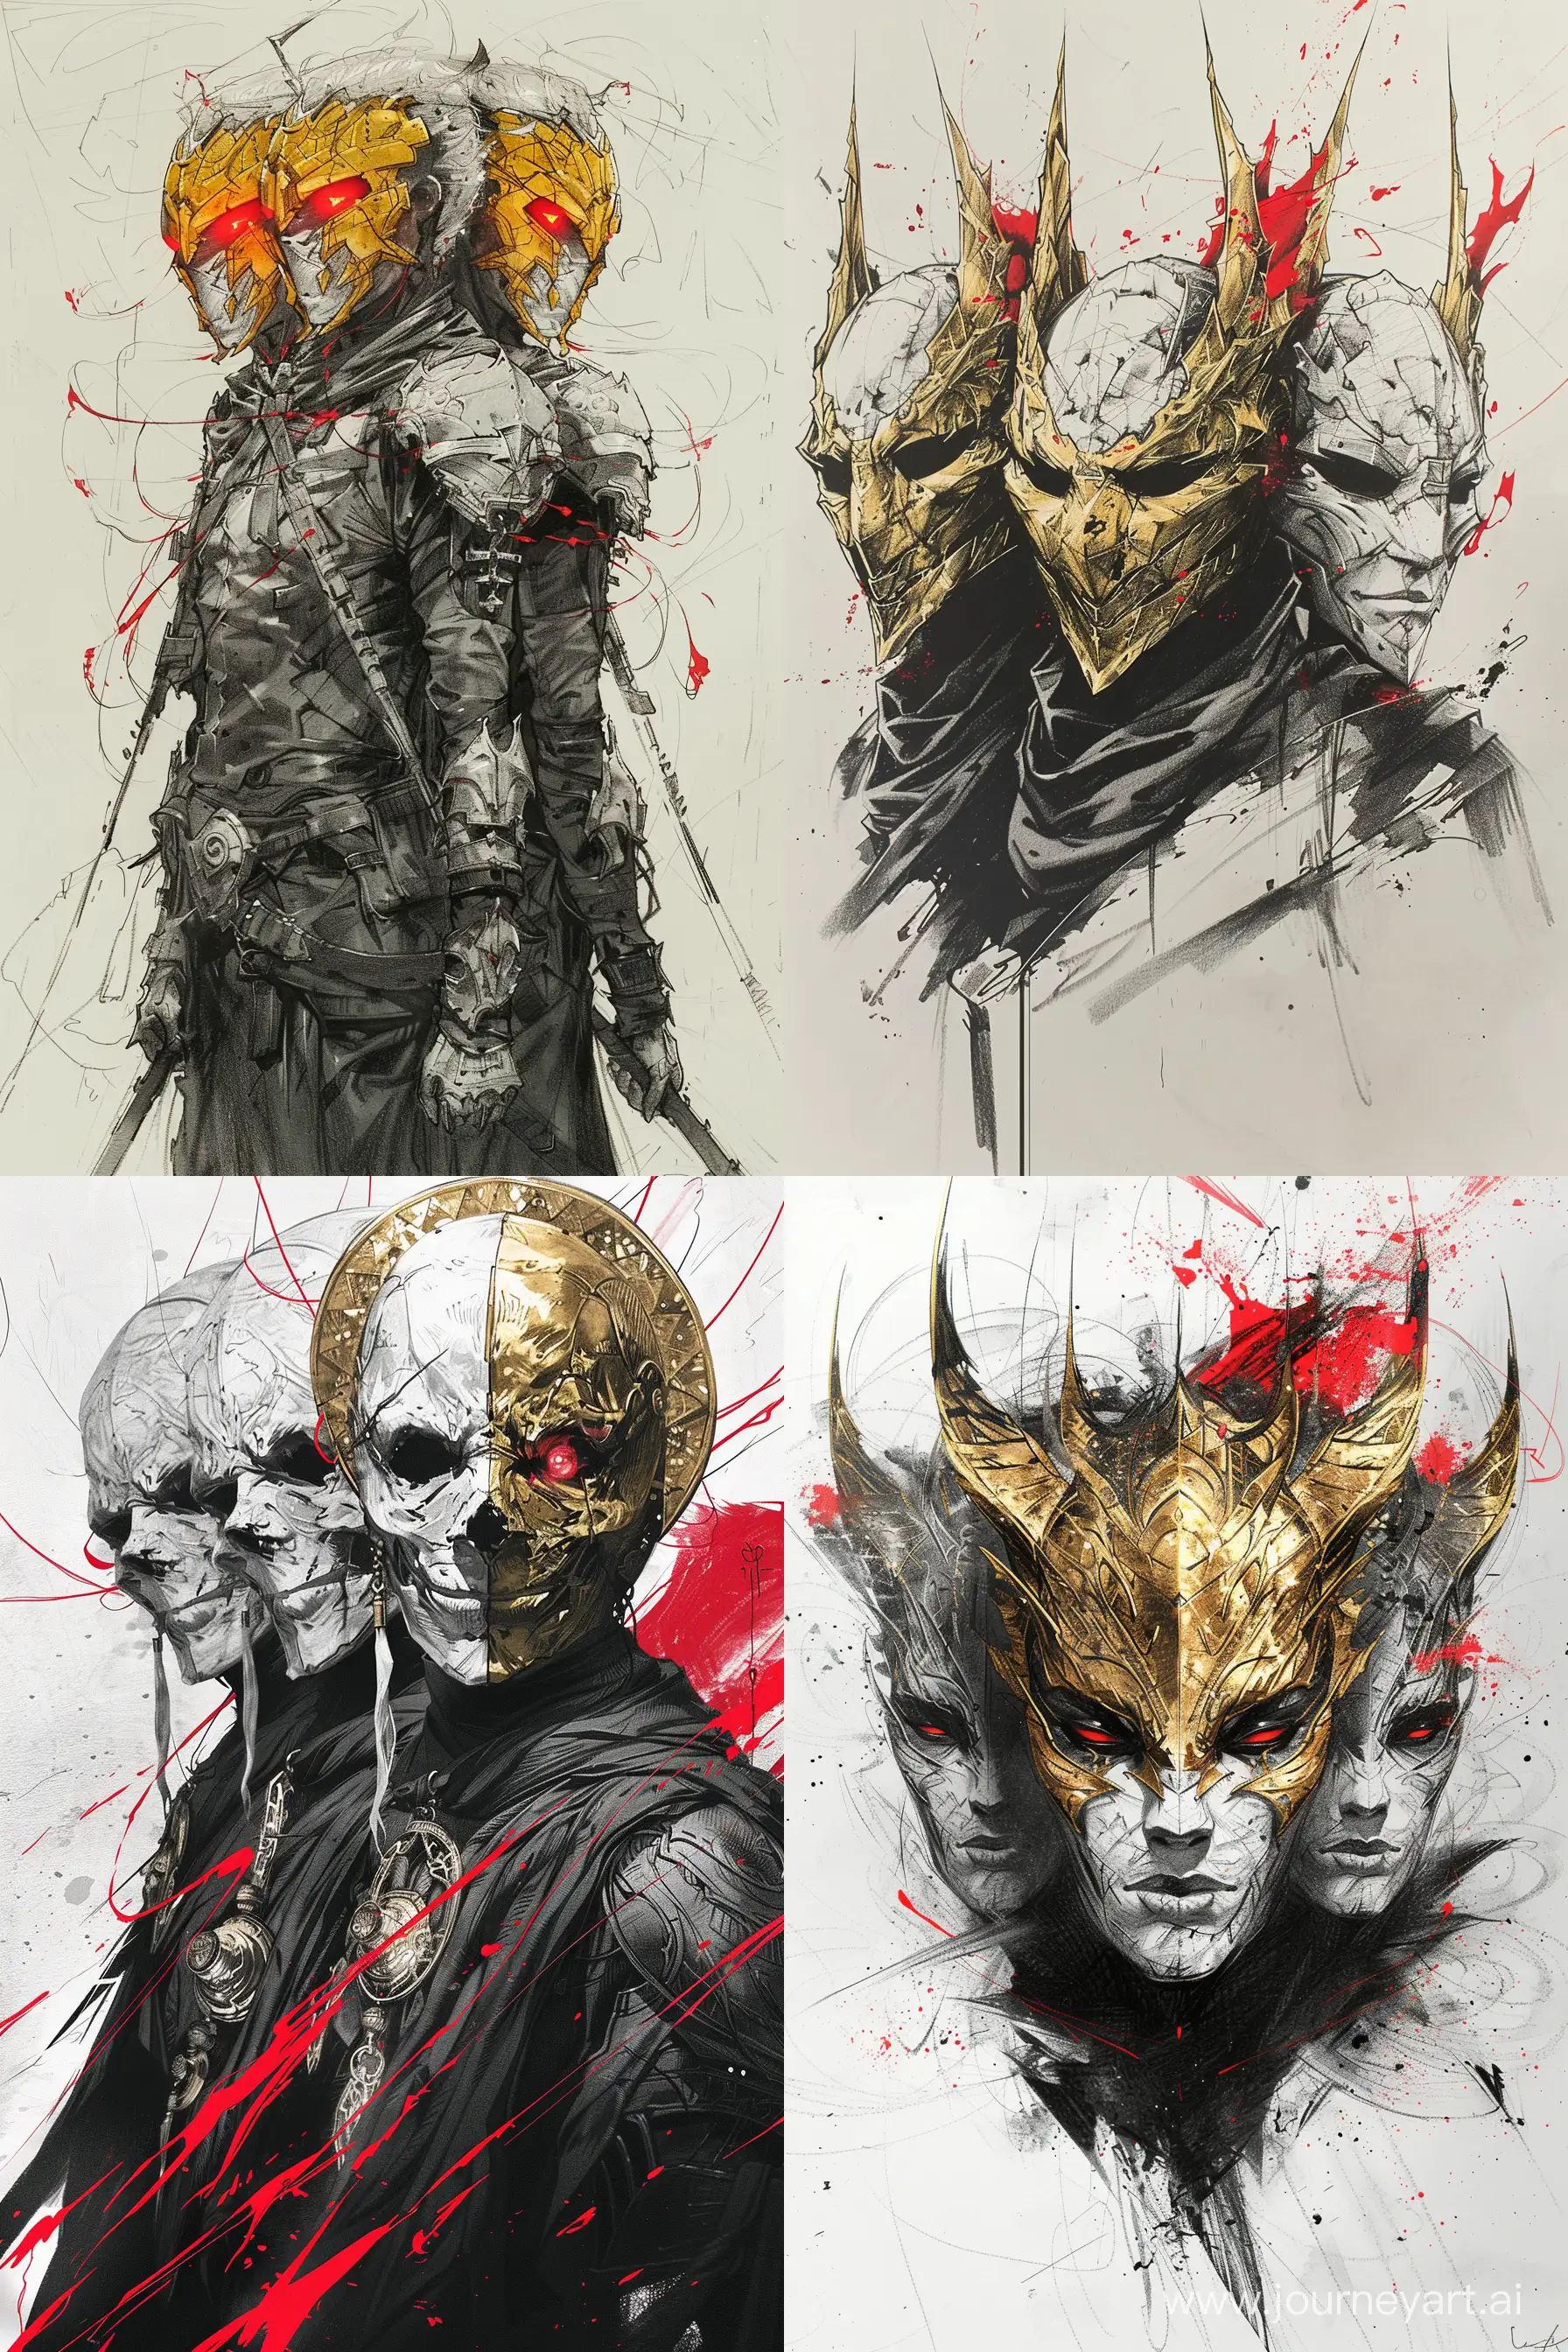 Four-Faced-Golden-Mask-Sketch-Dark-Fantasy-Character-Design-with-Red-Accents